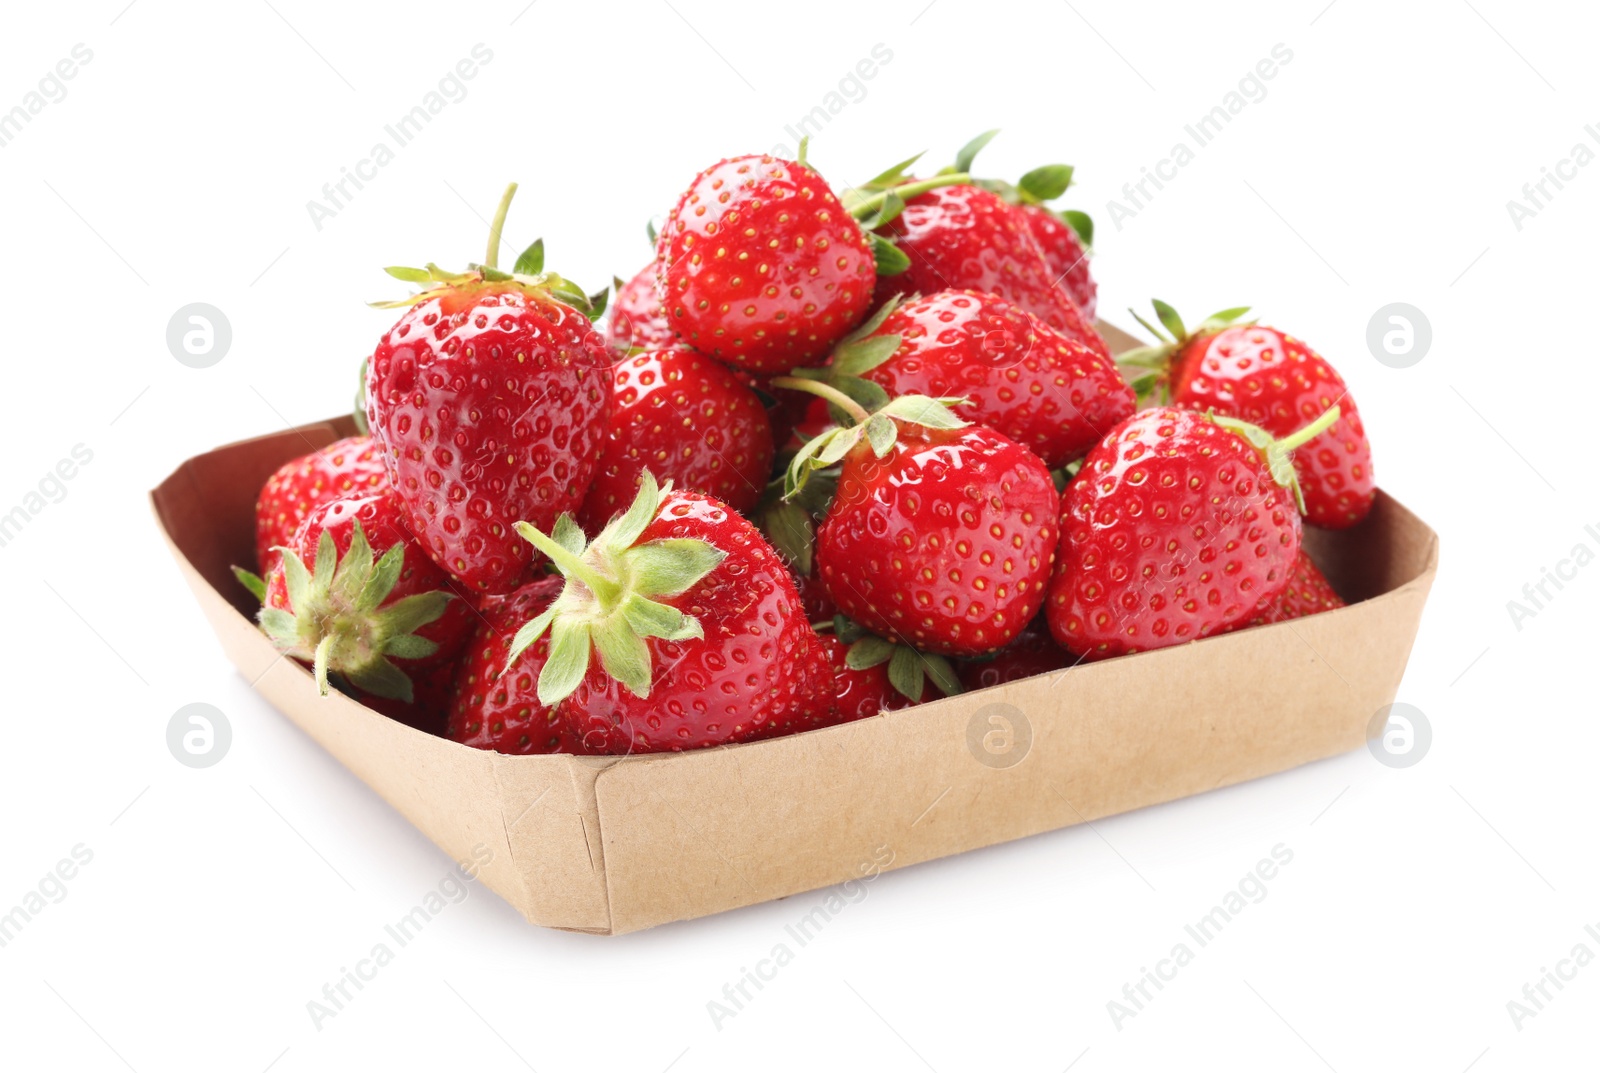 Photo of Ripe strawberries in cardboard container isolated on white